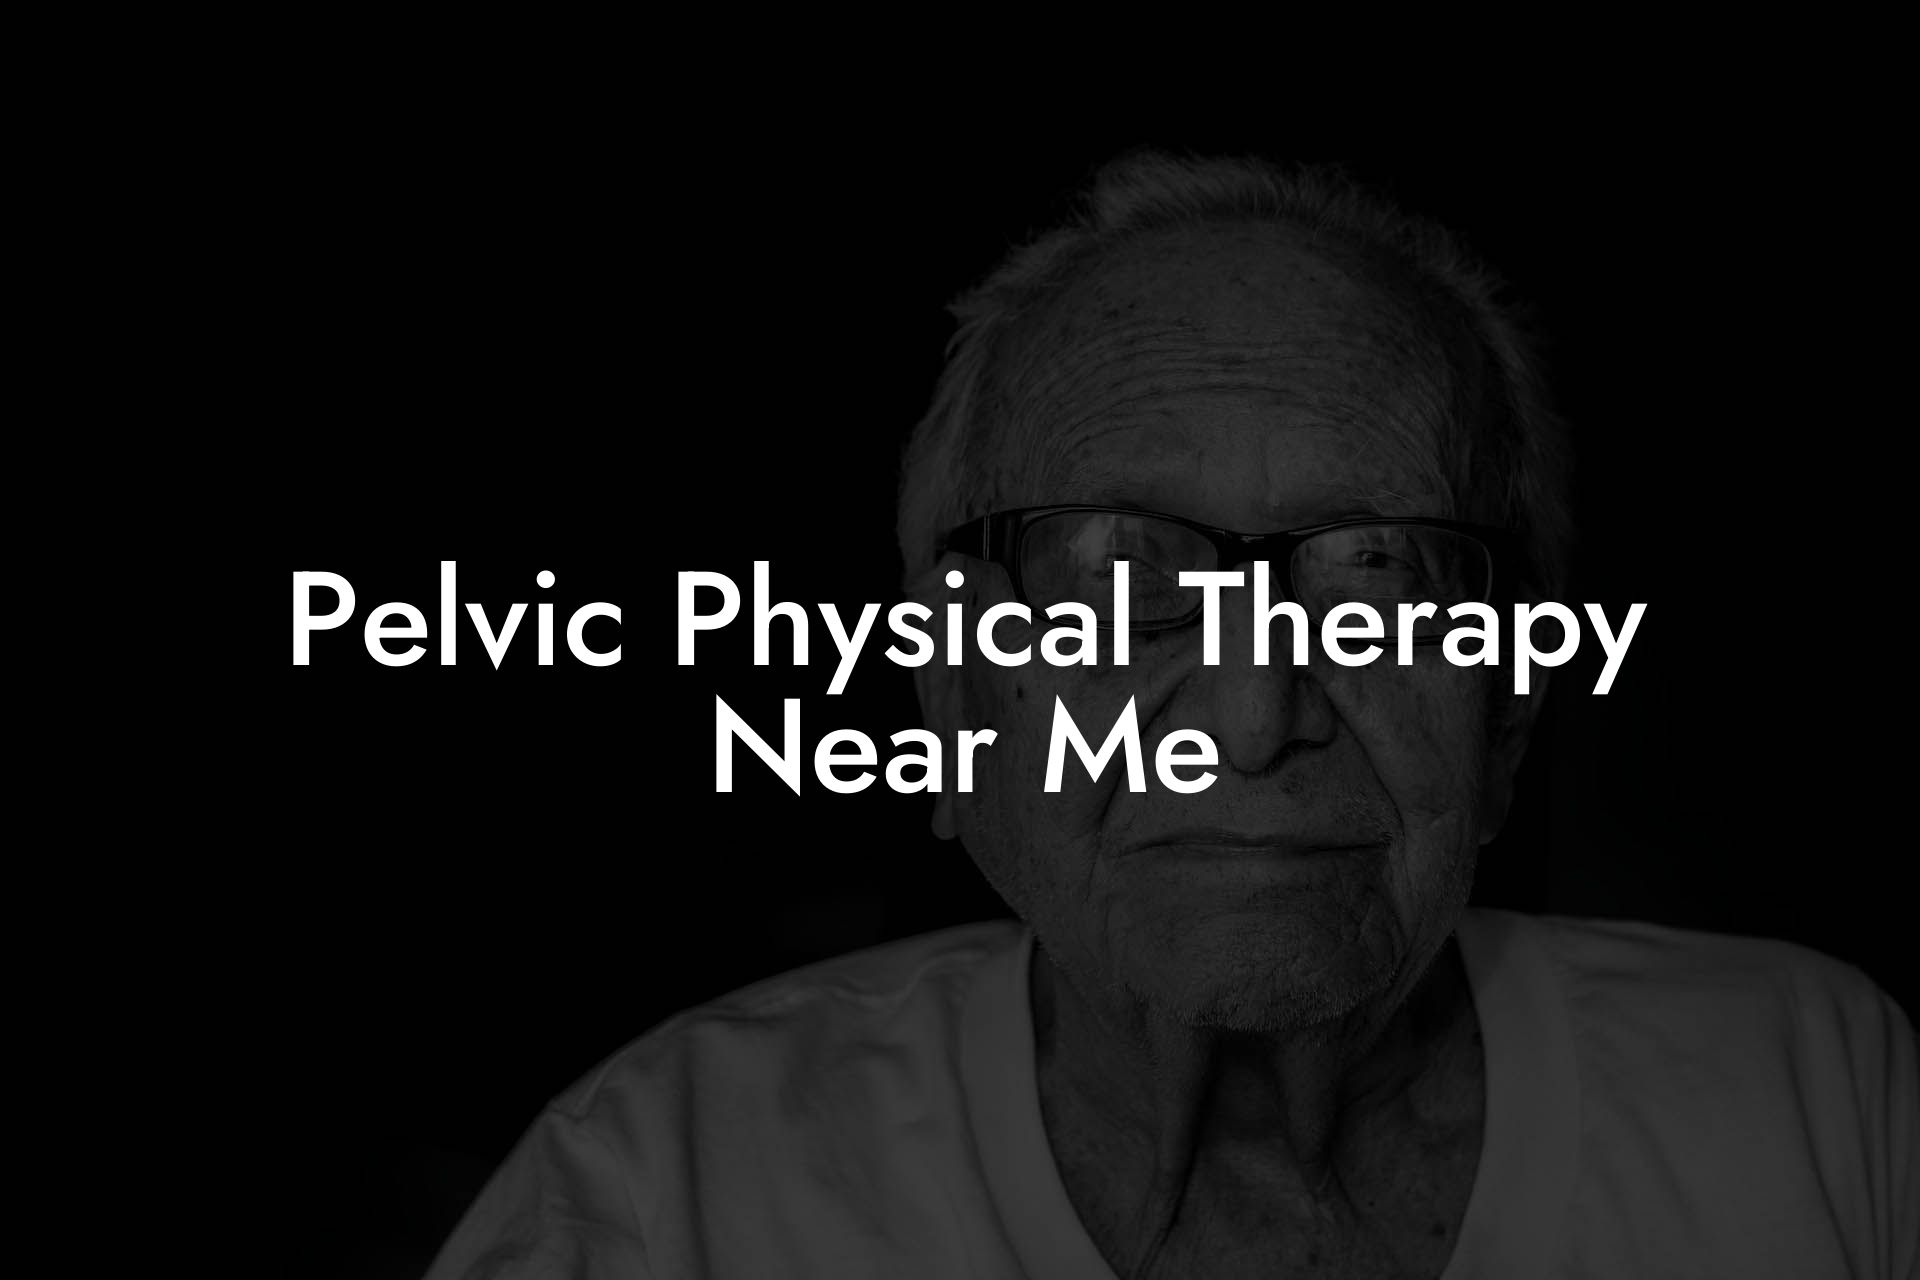 Pelvic Physical Therapy Near Me